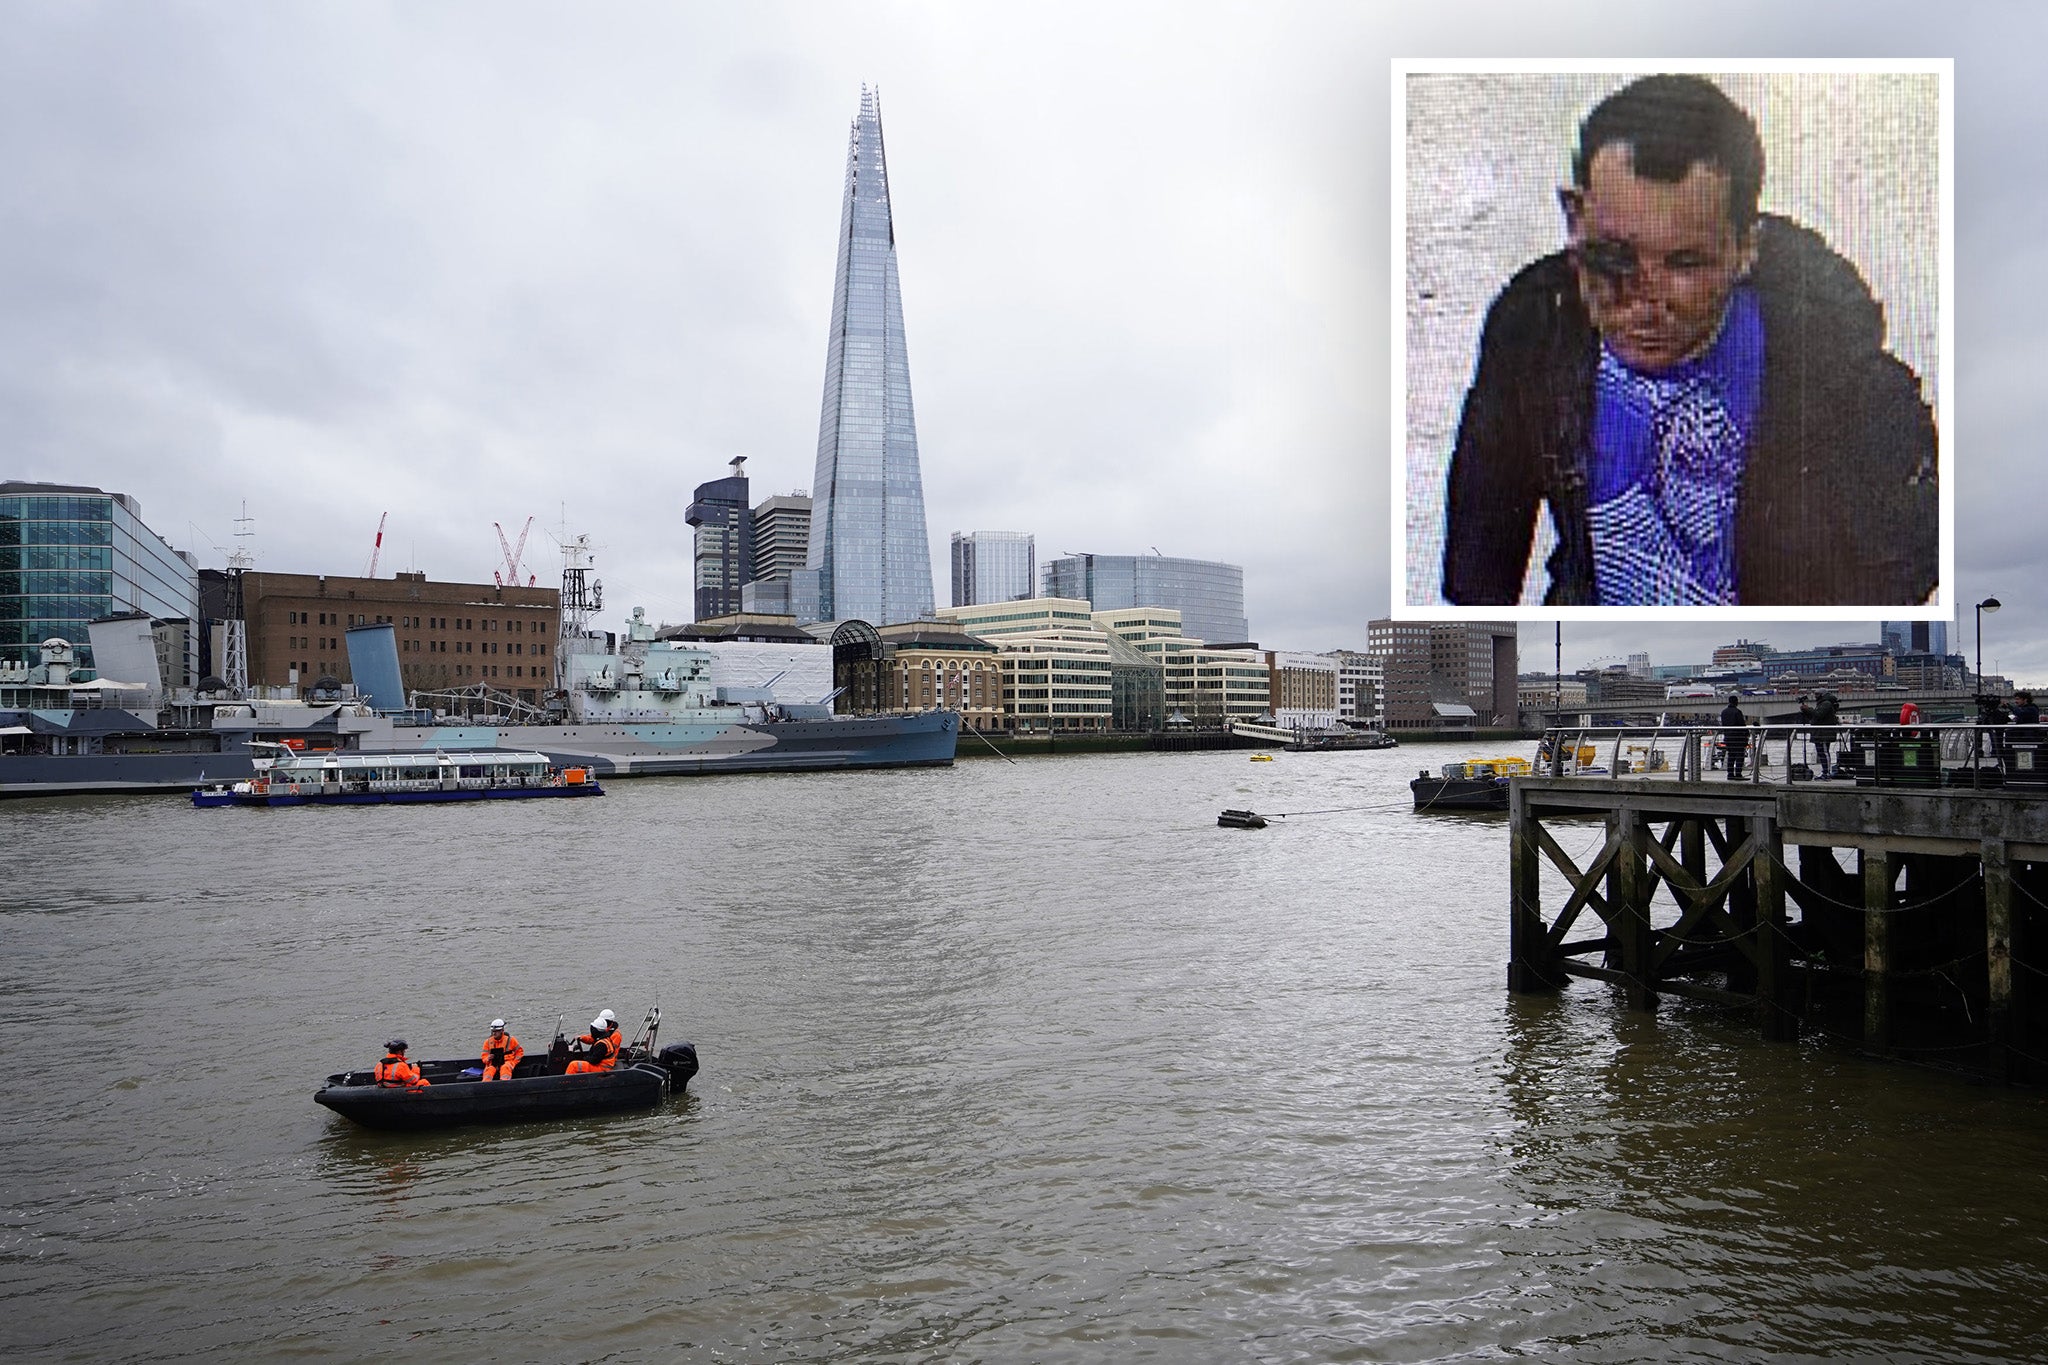 Ezedi’s body was pulled from the Thames near Tower Pier on 19 February